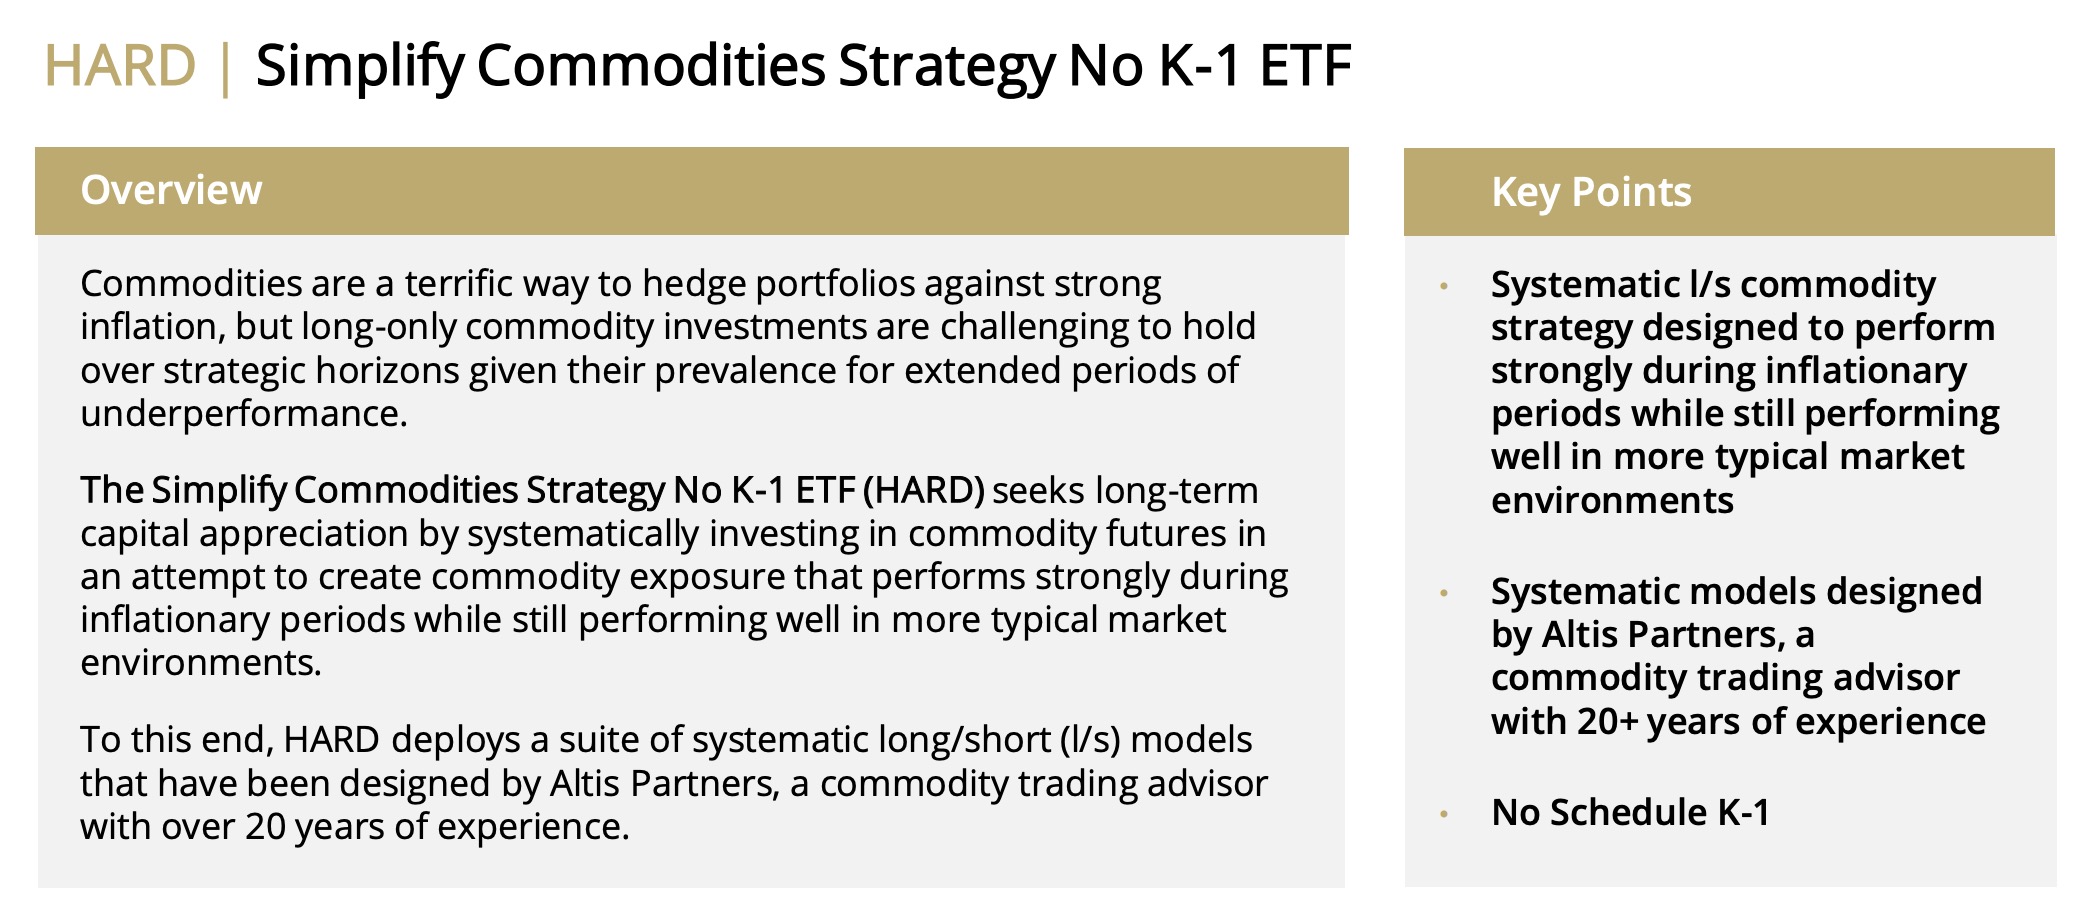 HARD Simplify Commodities Strategy No K-1 ETF Overview and Key Points 